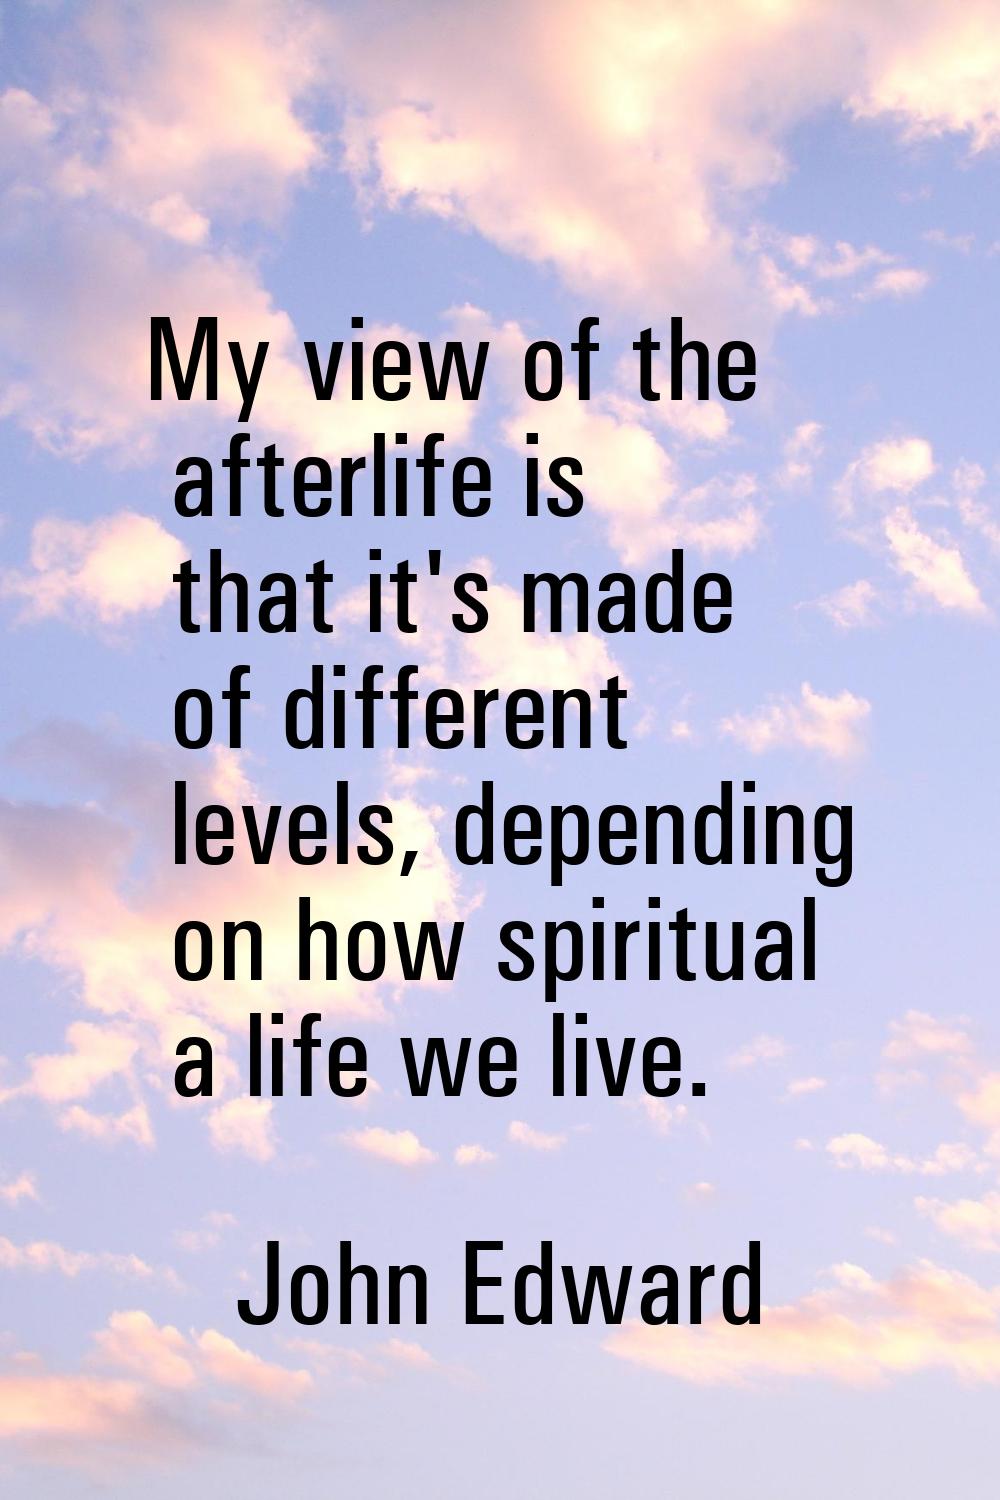 My view of the afterlife is that it's made of different levels, depending on how spiritual a life w